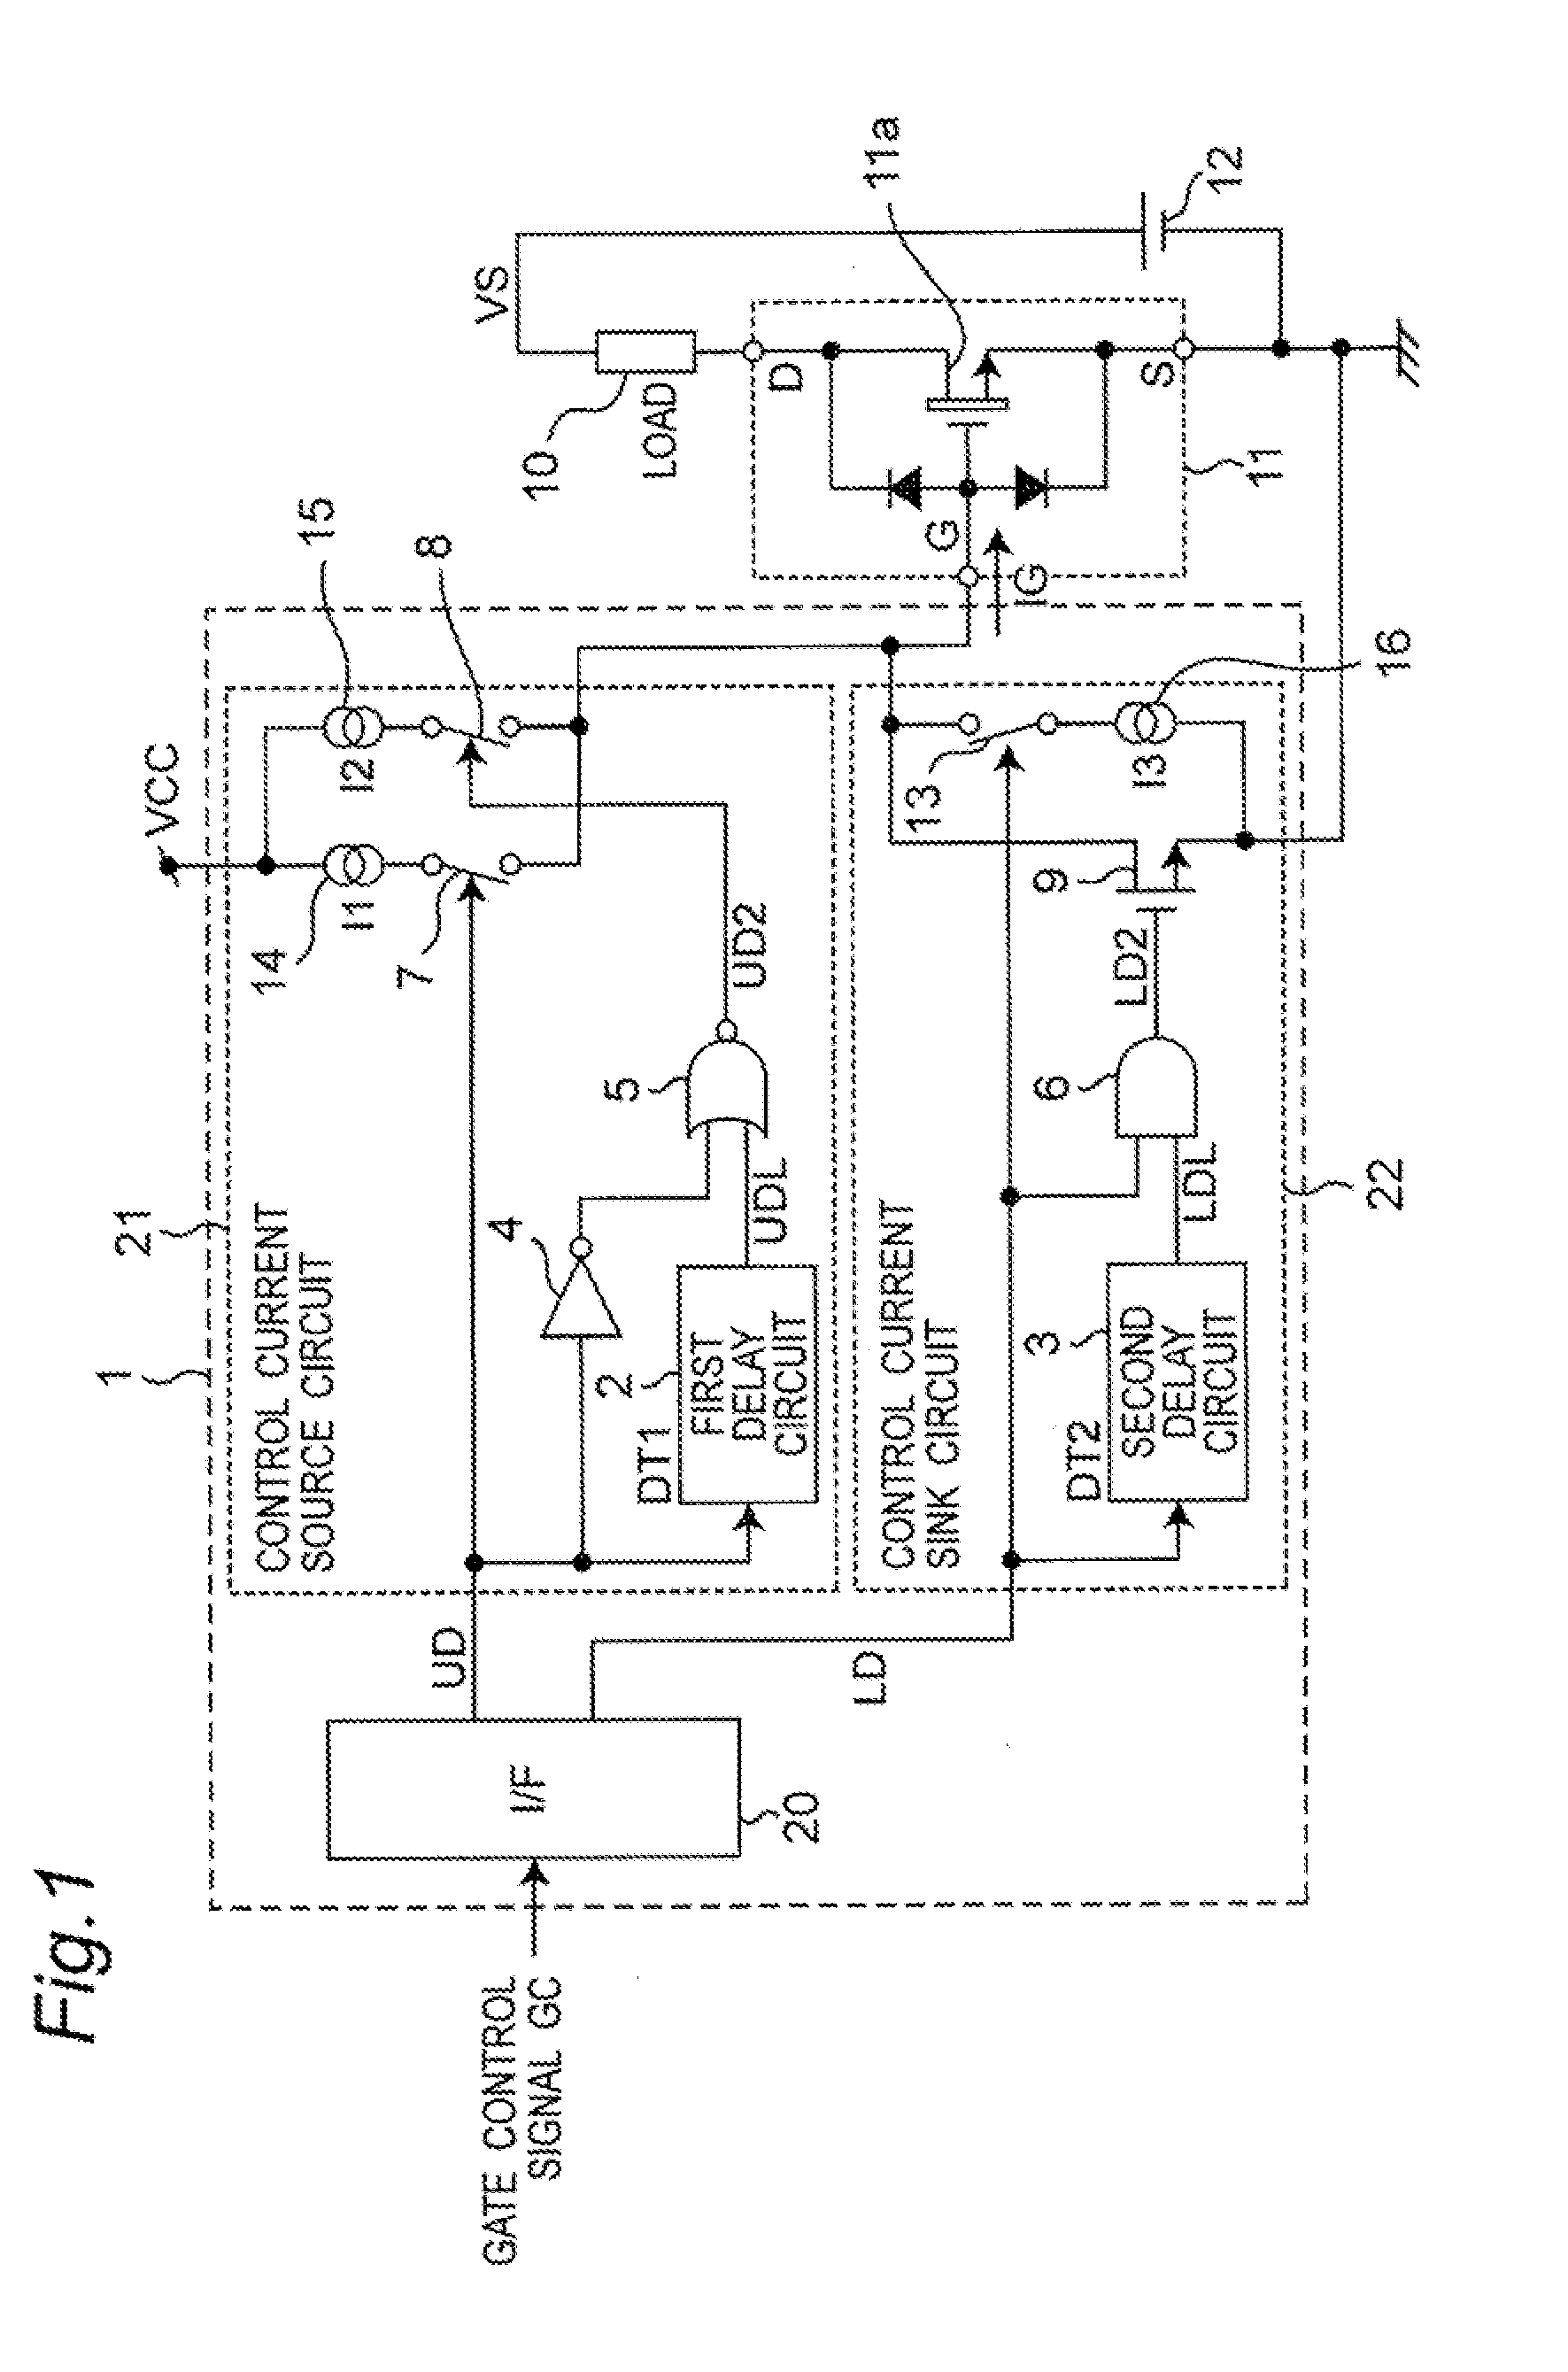 Switching device driving unit and semiconductor apparatus